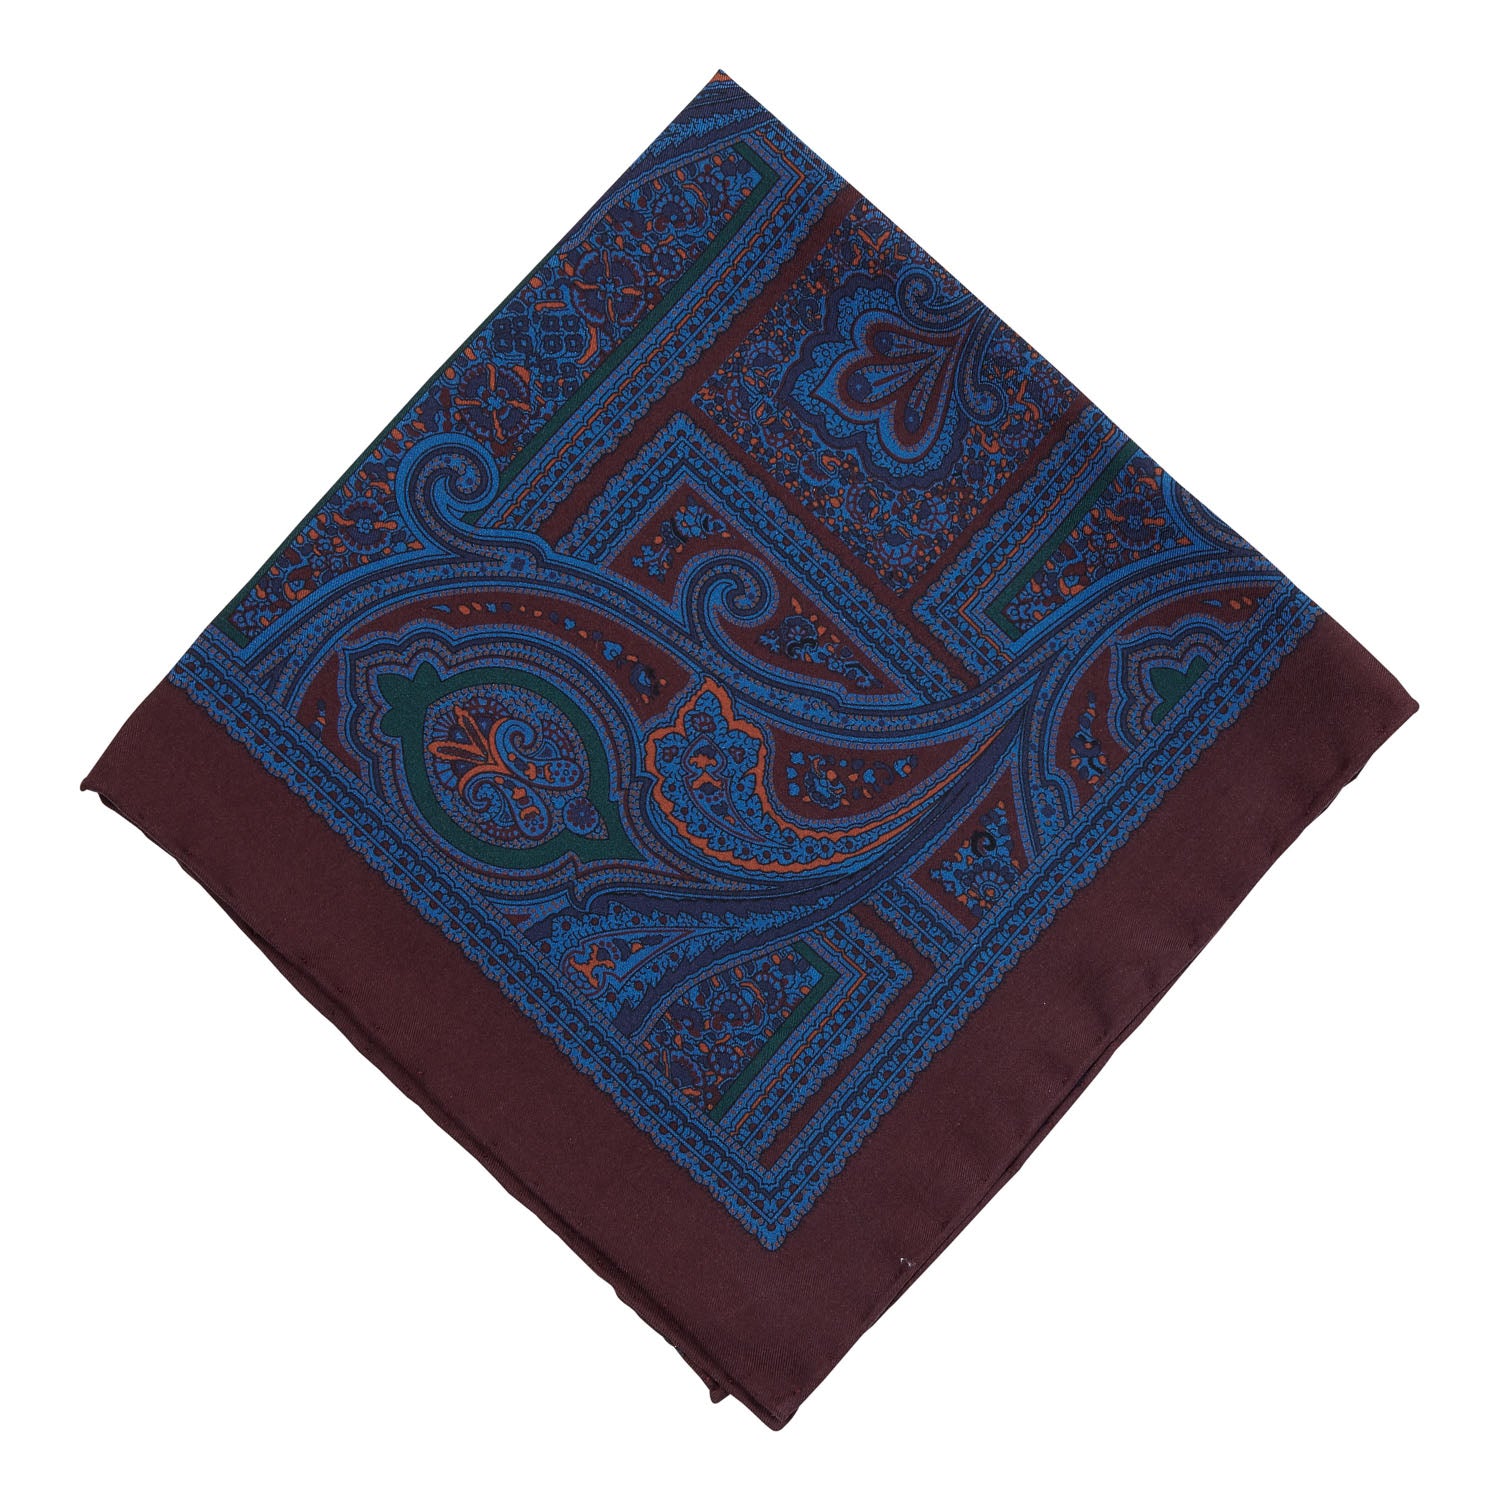 A Sovereign Grade Ancient Madder Wine pocket square in blue and brown with a paisley pattern from KirbyAllison.com.